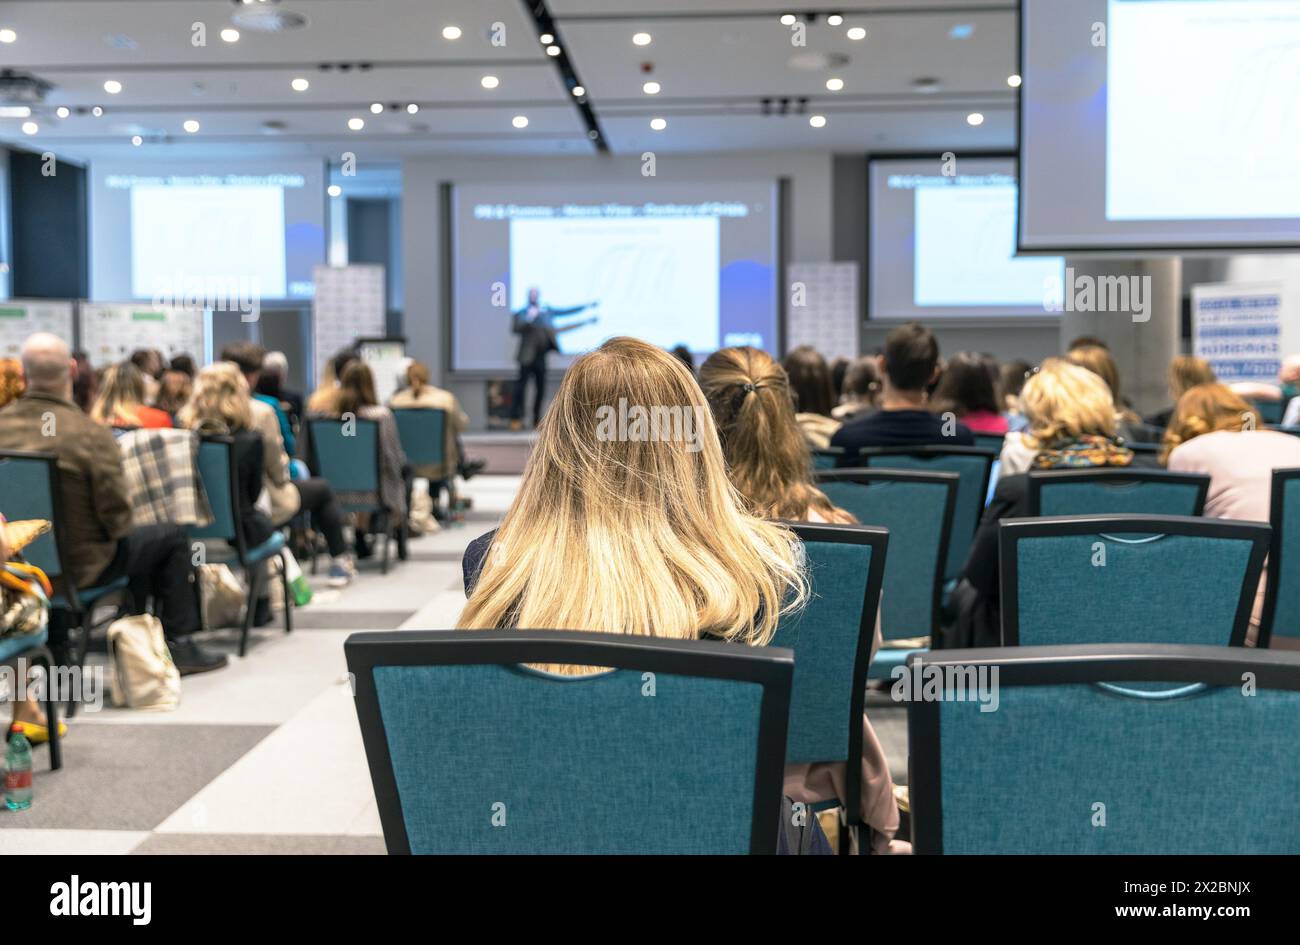 Business conference, corporate presentation, workshop, coaching training, company meeting, public or political event Stock Photo